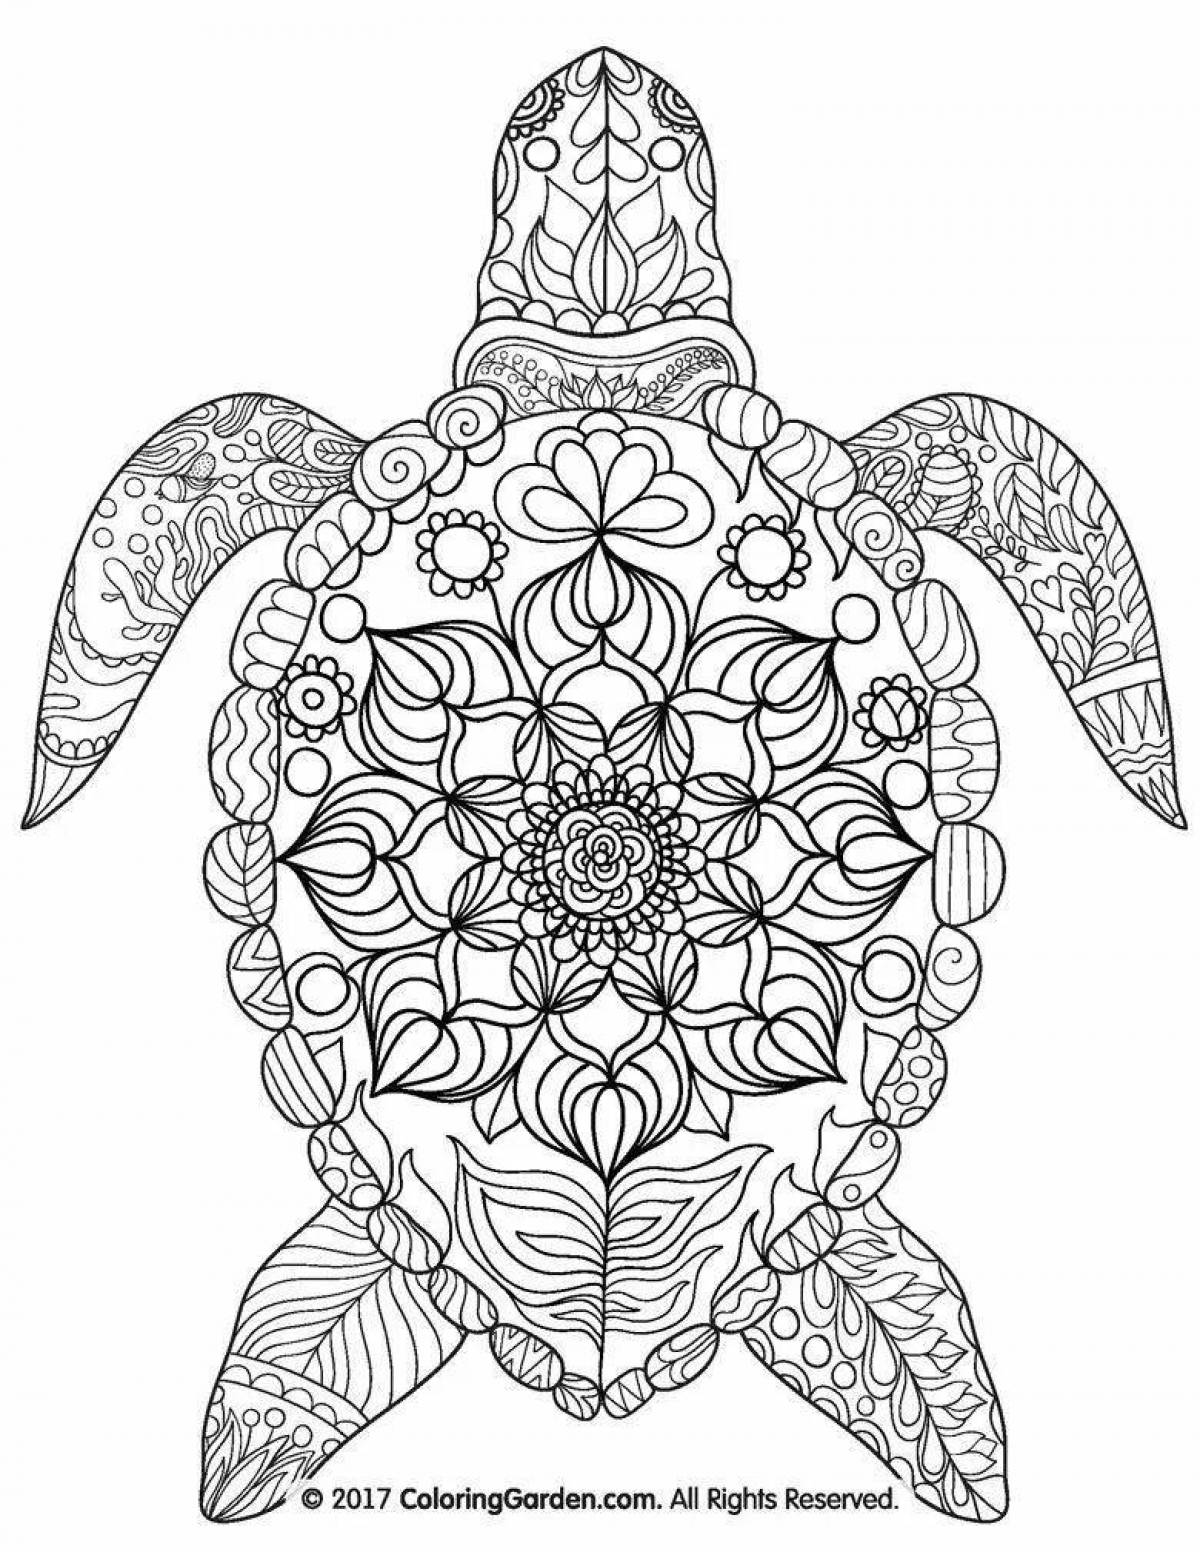 Refreshing relax living patterns coloring page